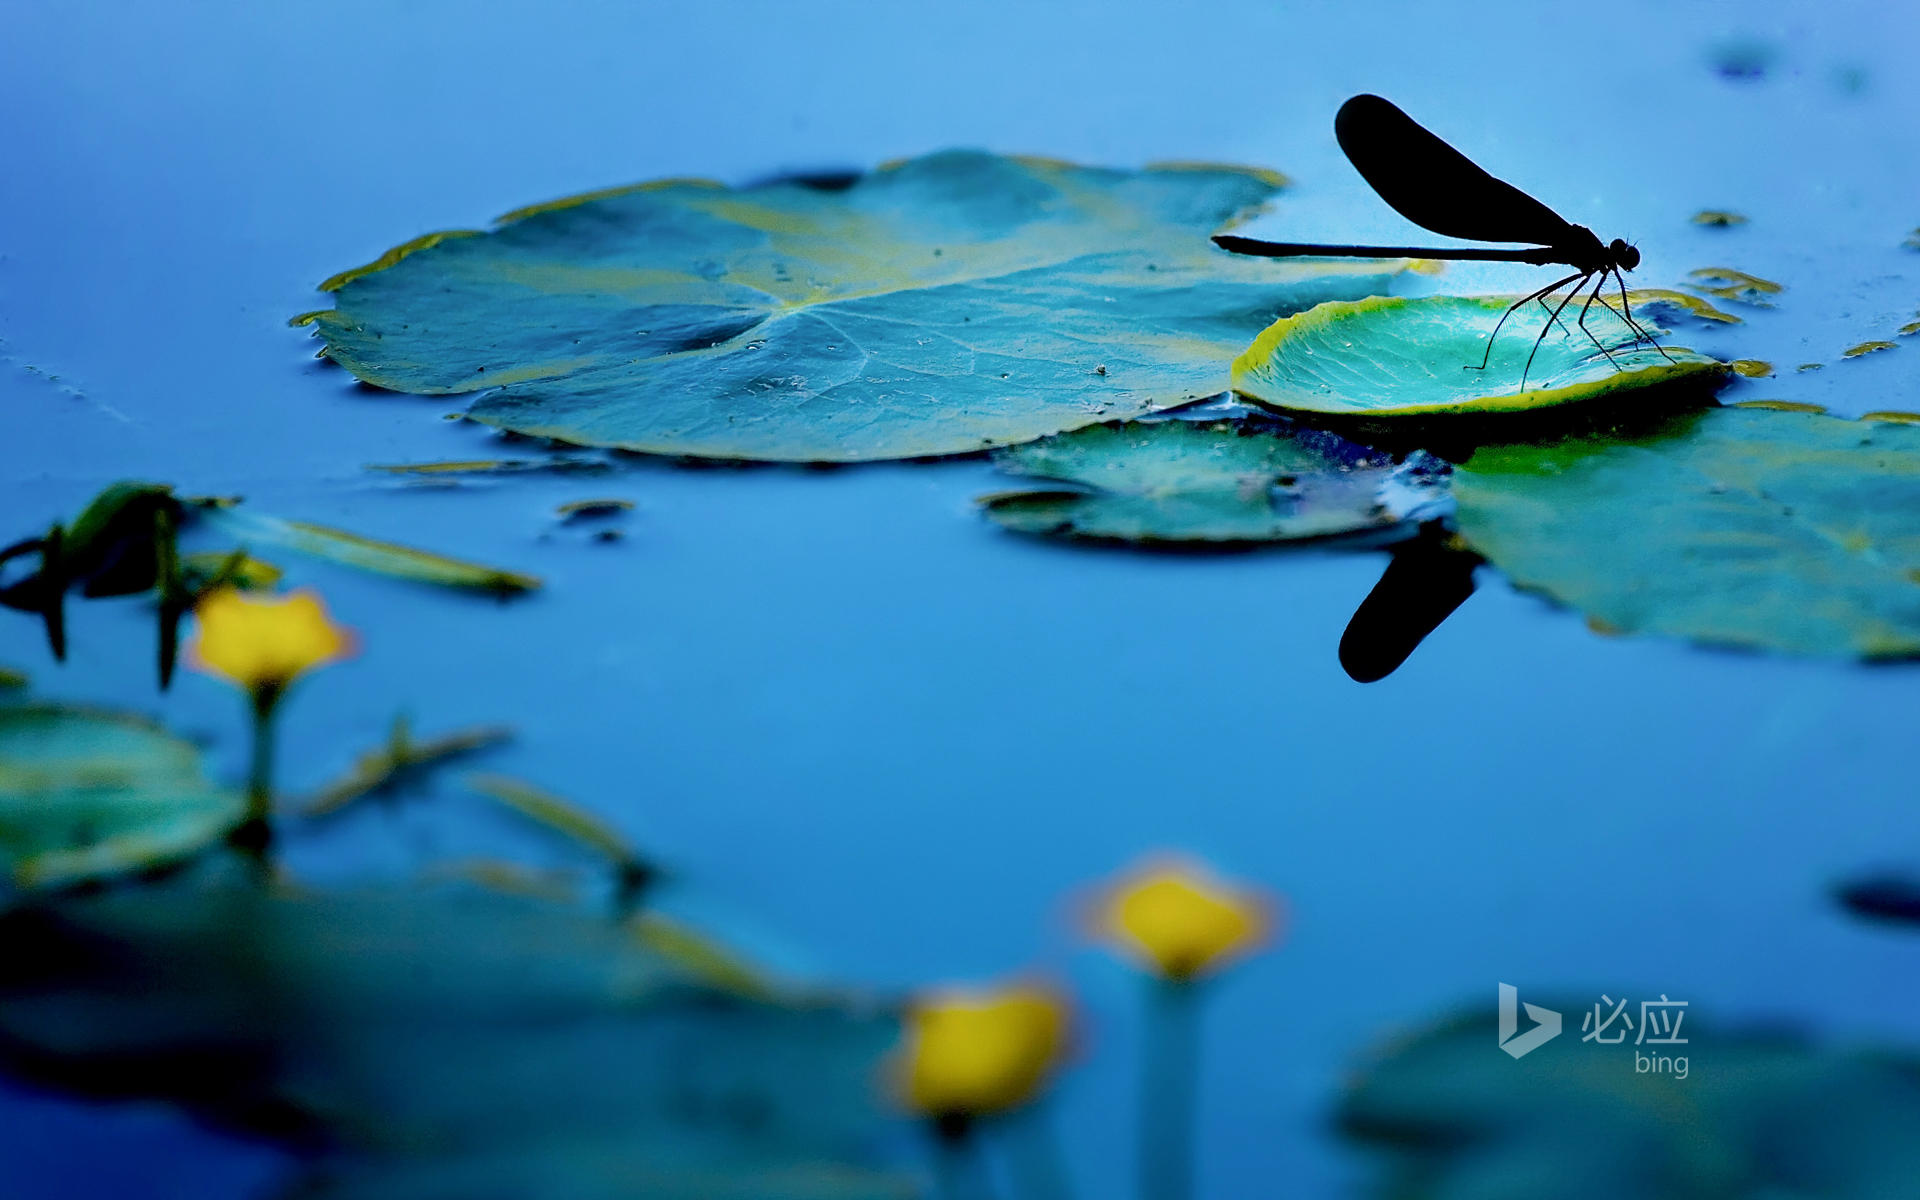 HD Bing Wallpaper Archive Daily Full Resolution